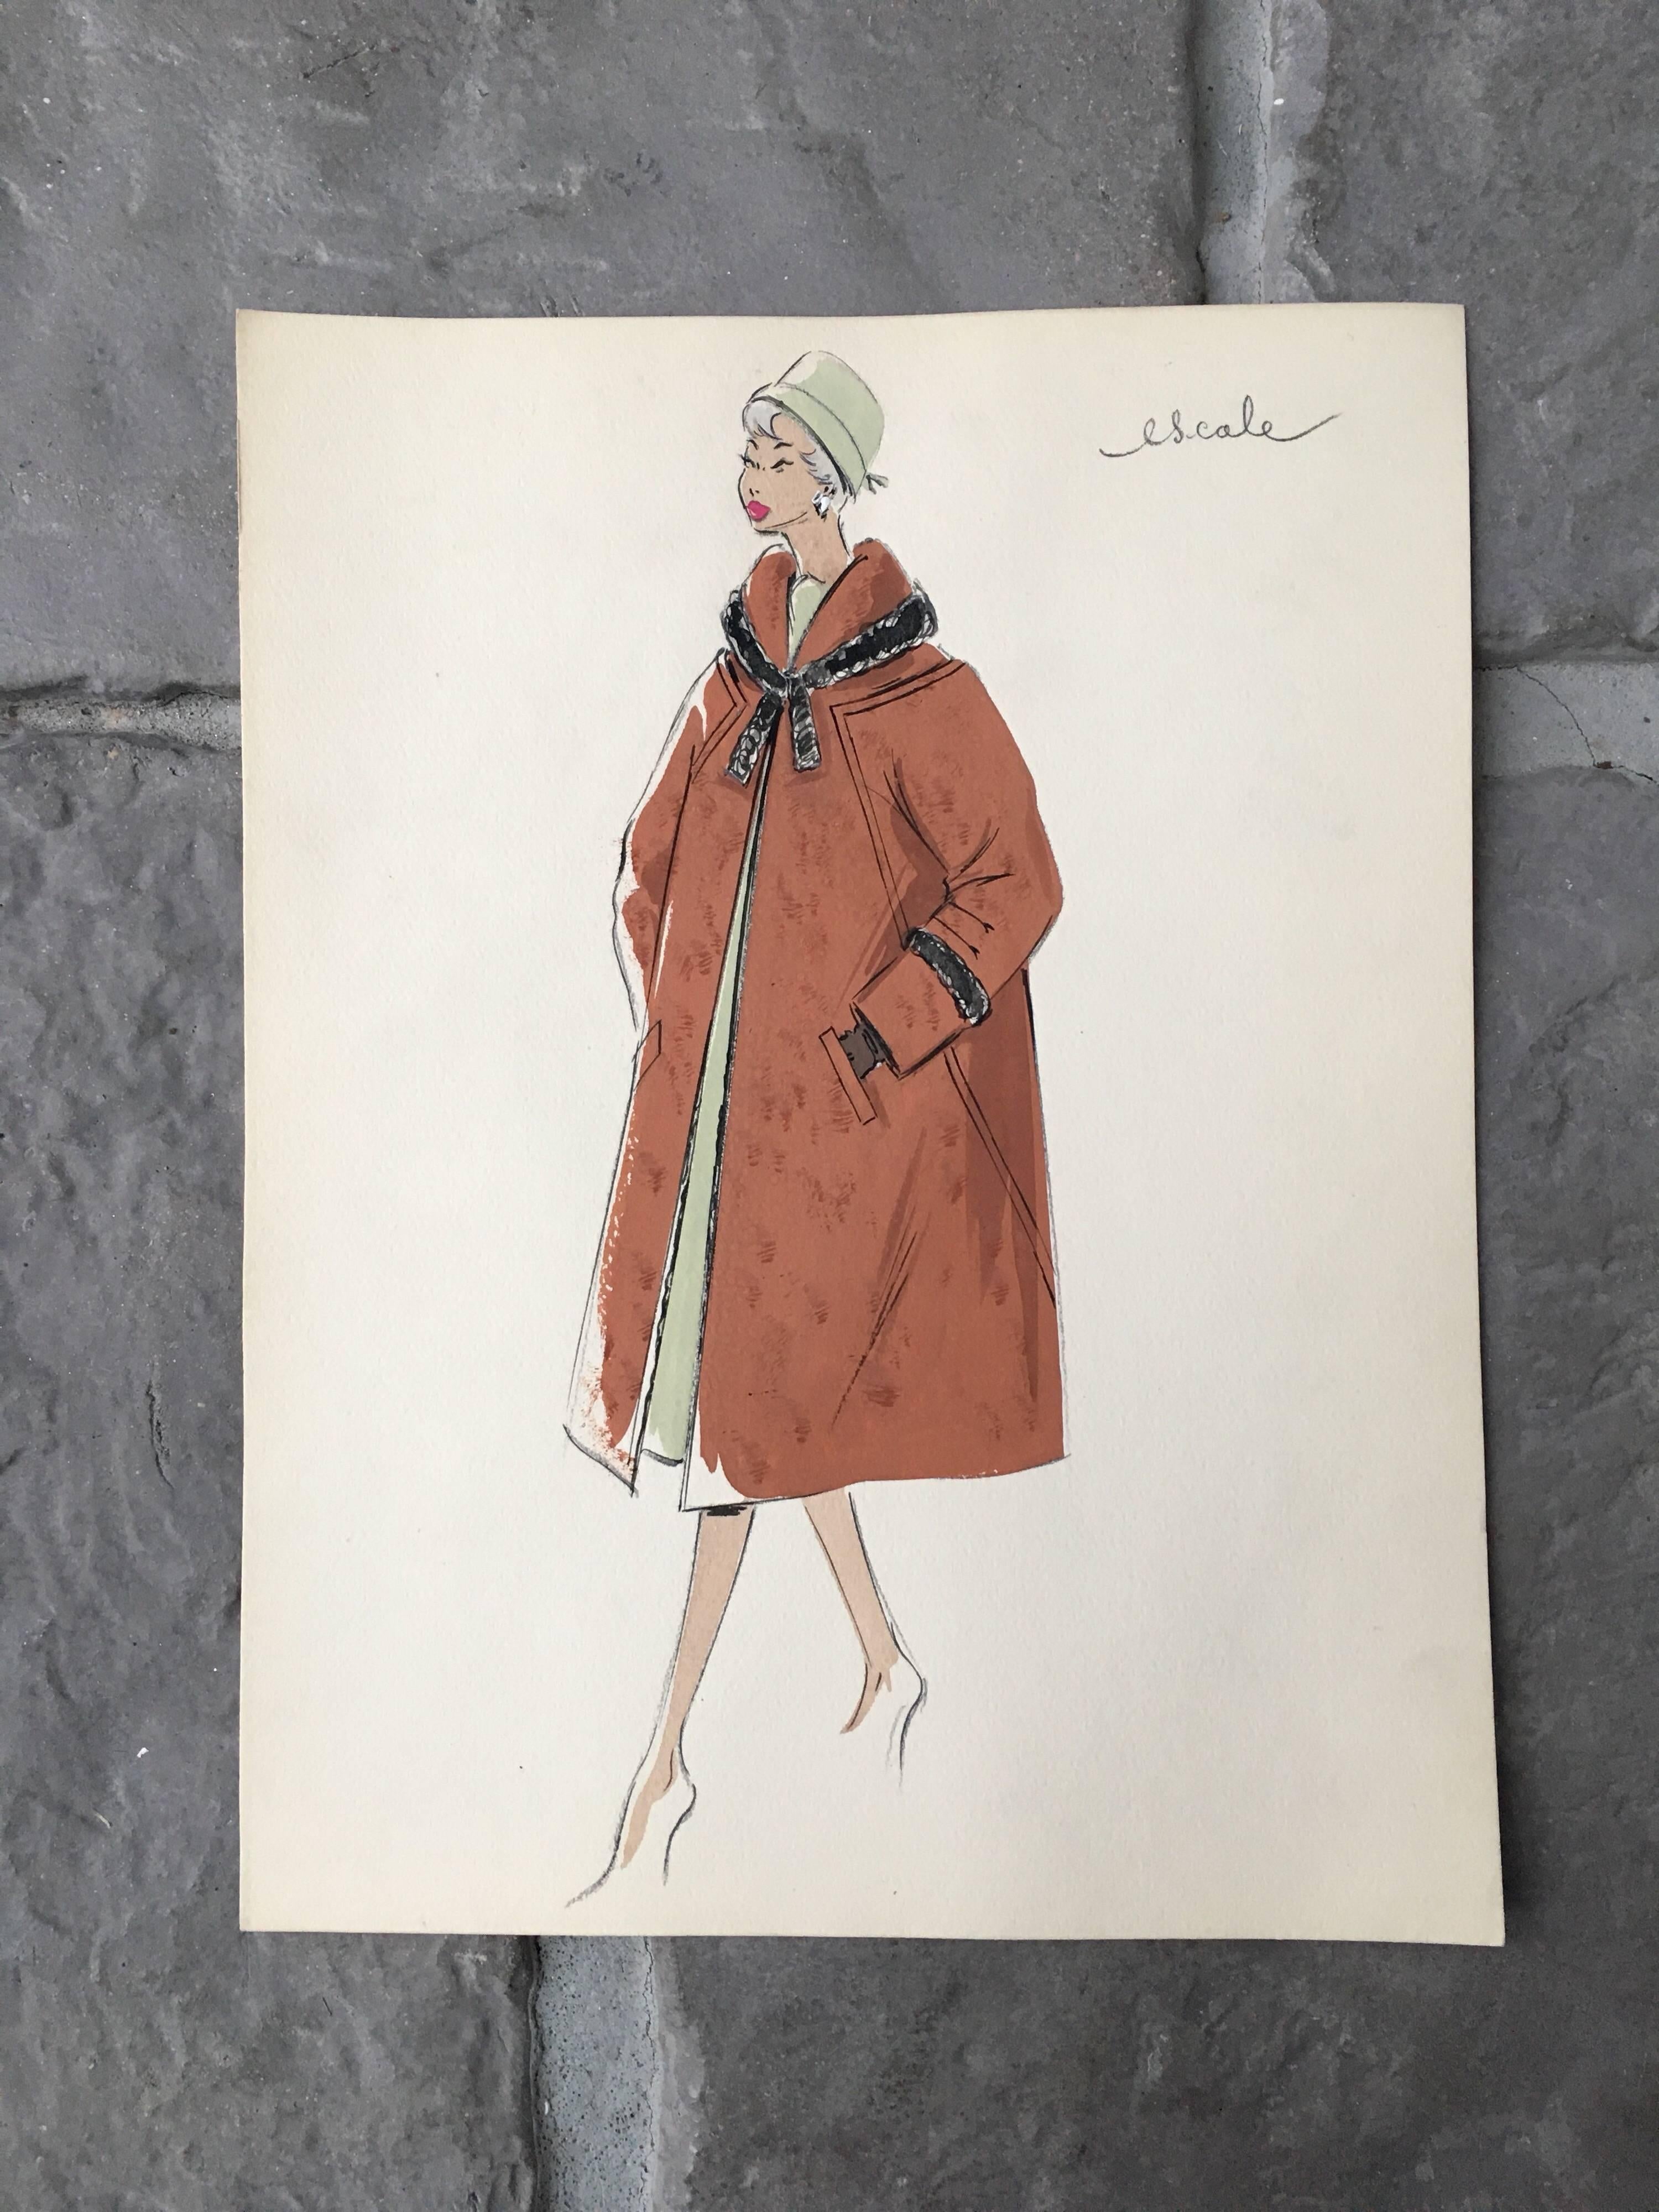 Lady in 1950's Elegant Coat Parisian Fashion Illustration Sketch - Painting by Unknown